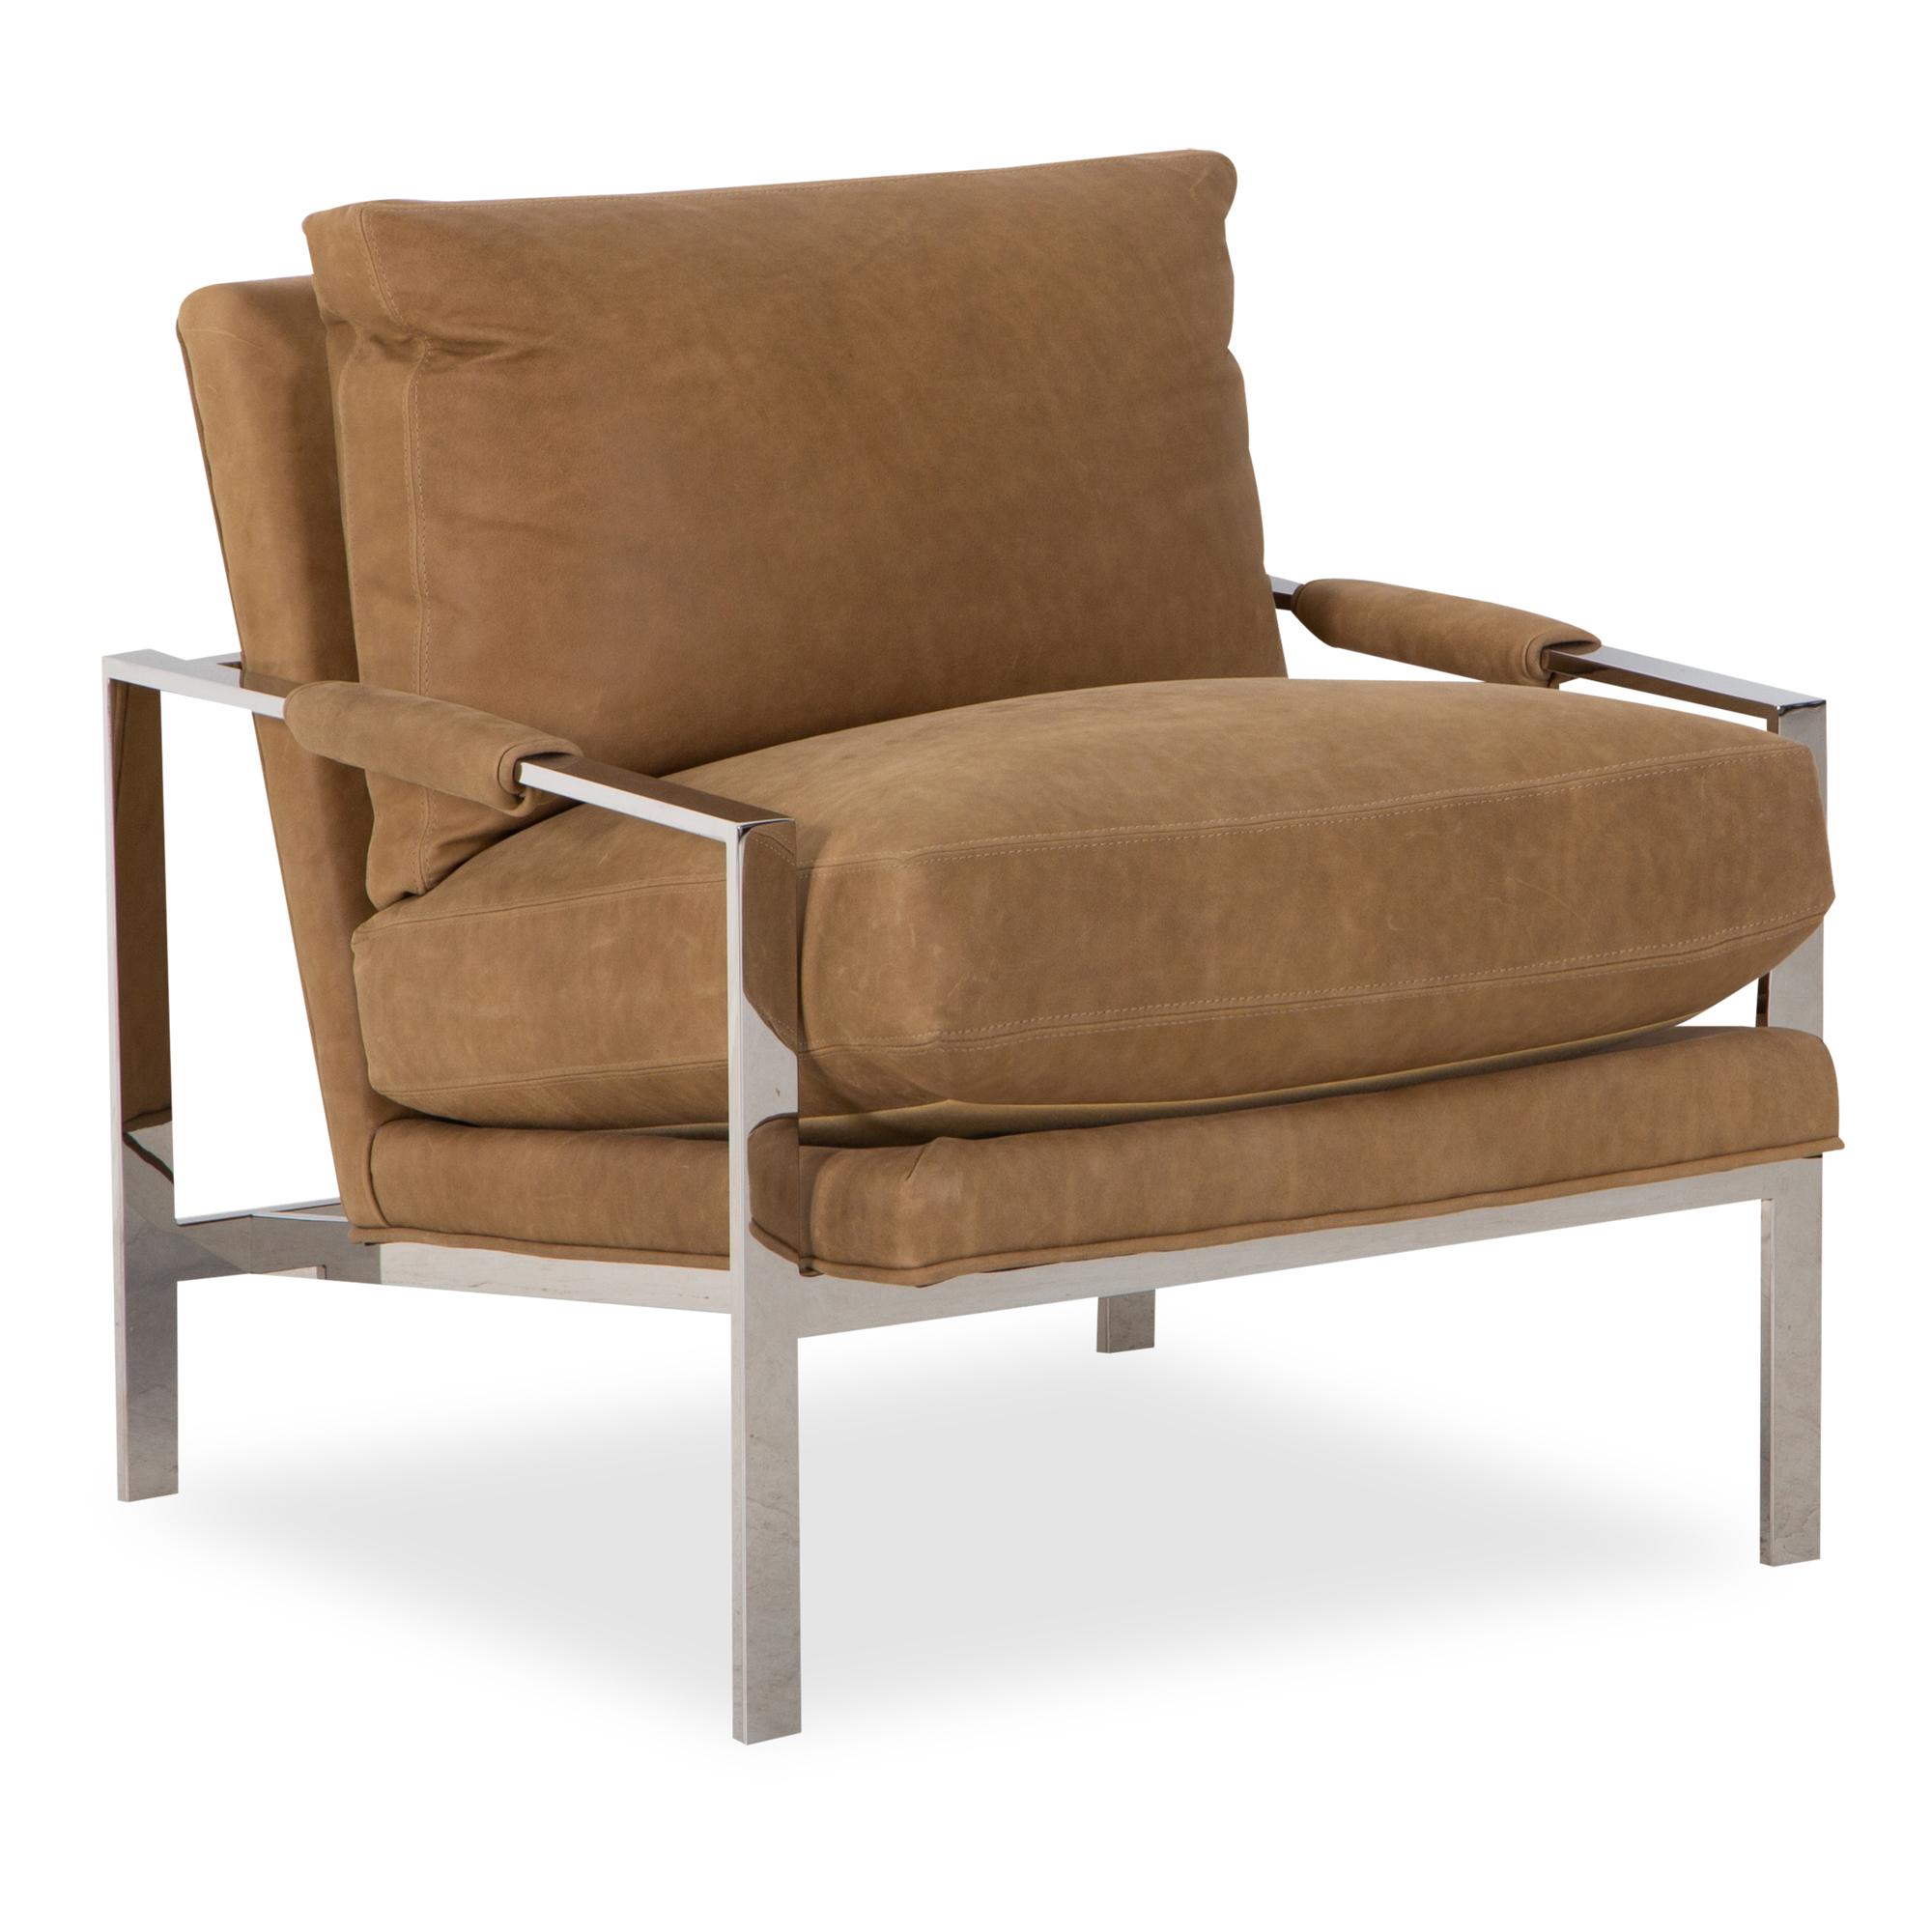 Originally designed in 1966 by Milo Baughman, the 951 Lounge Chair is one of the most iconic chair designs of the mid-century modern era.